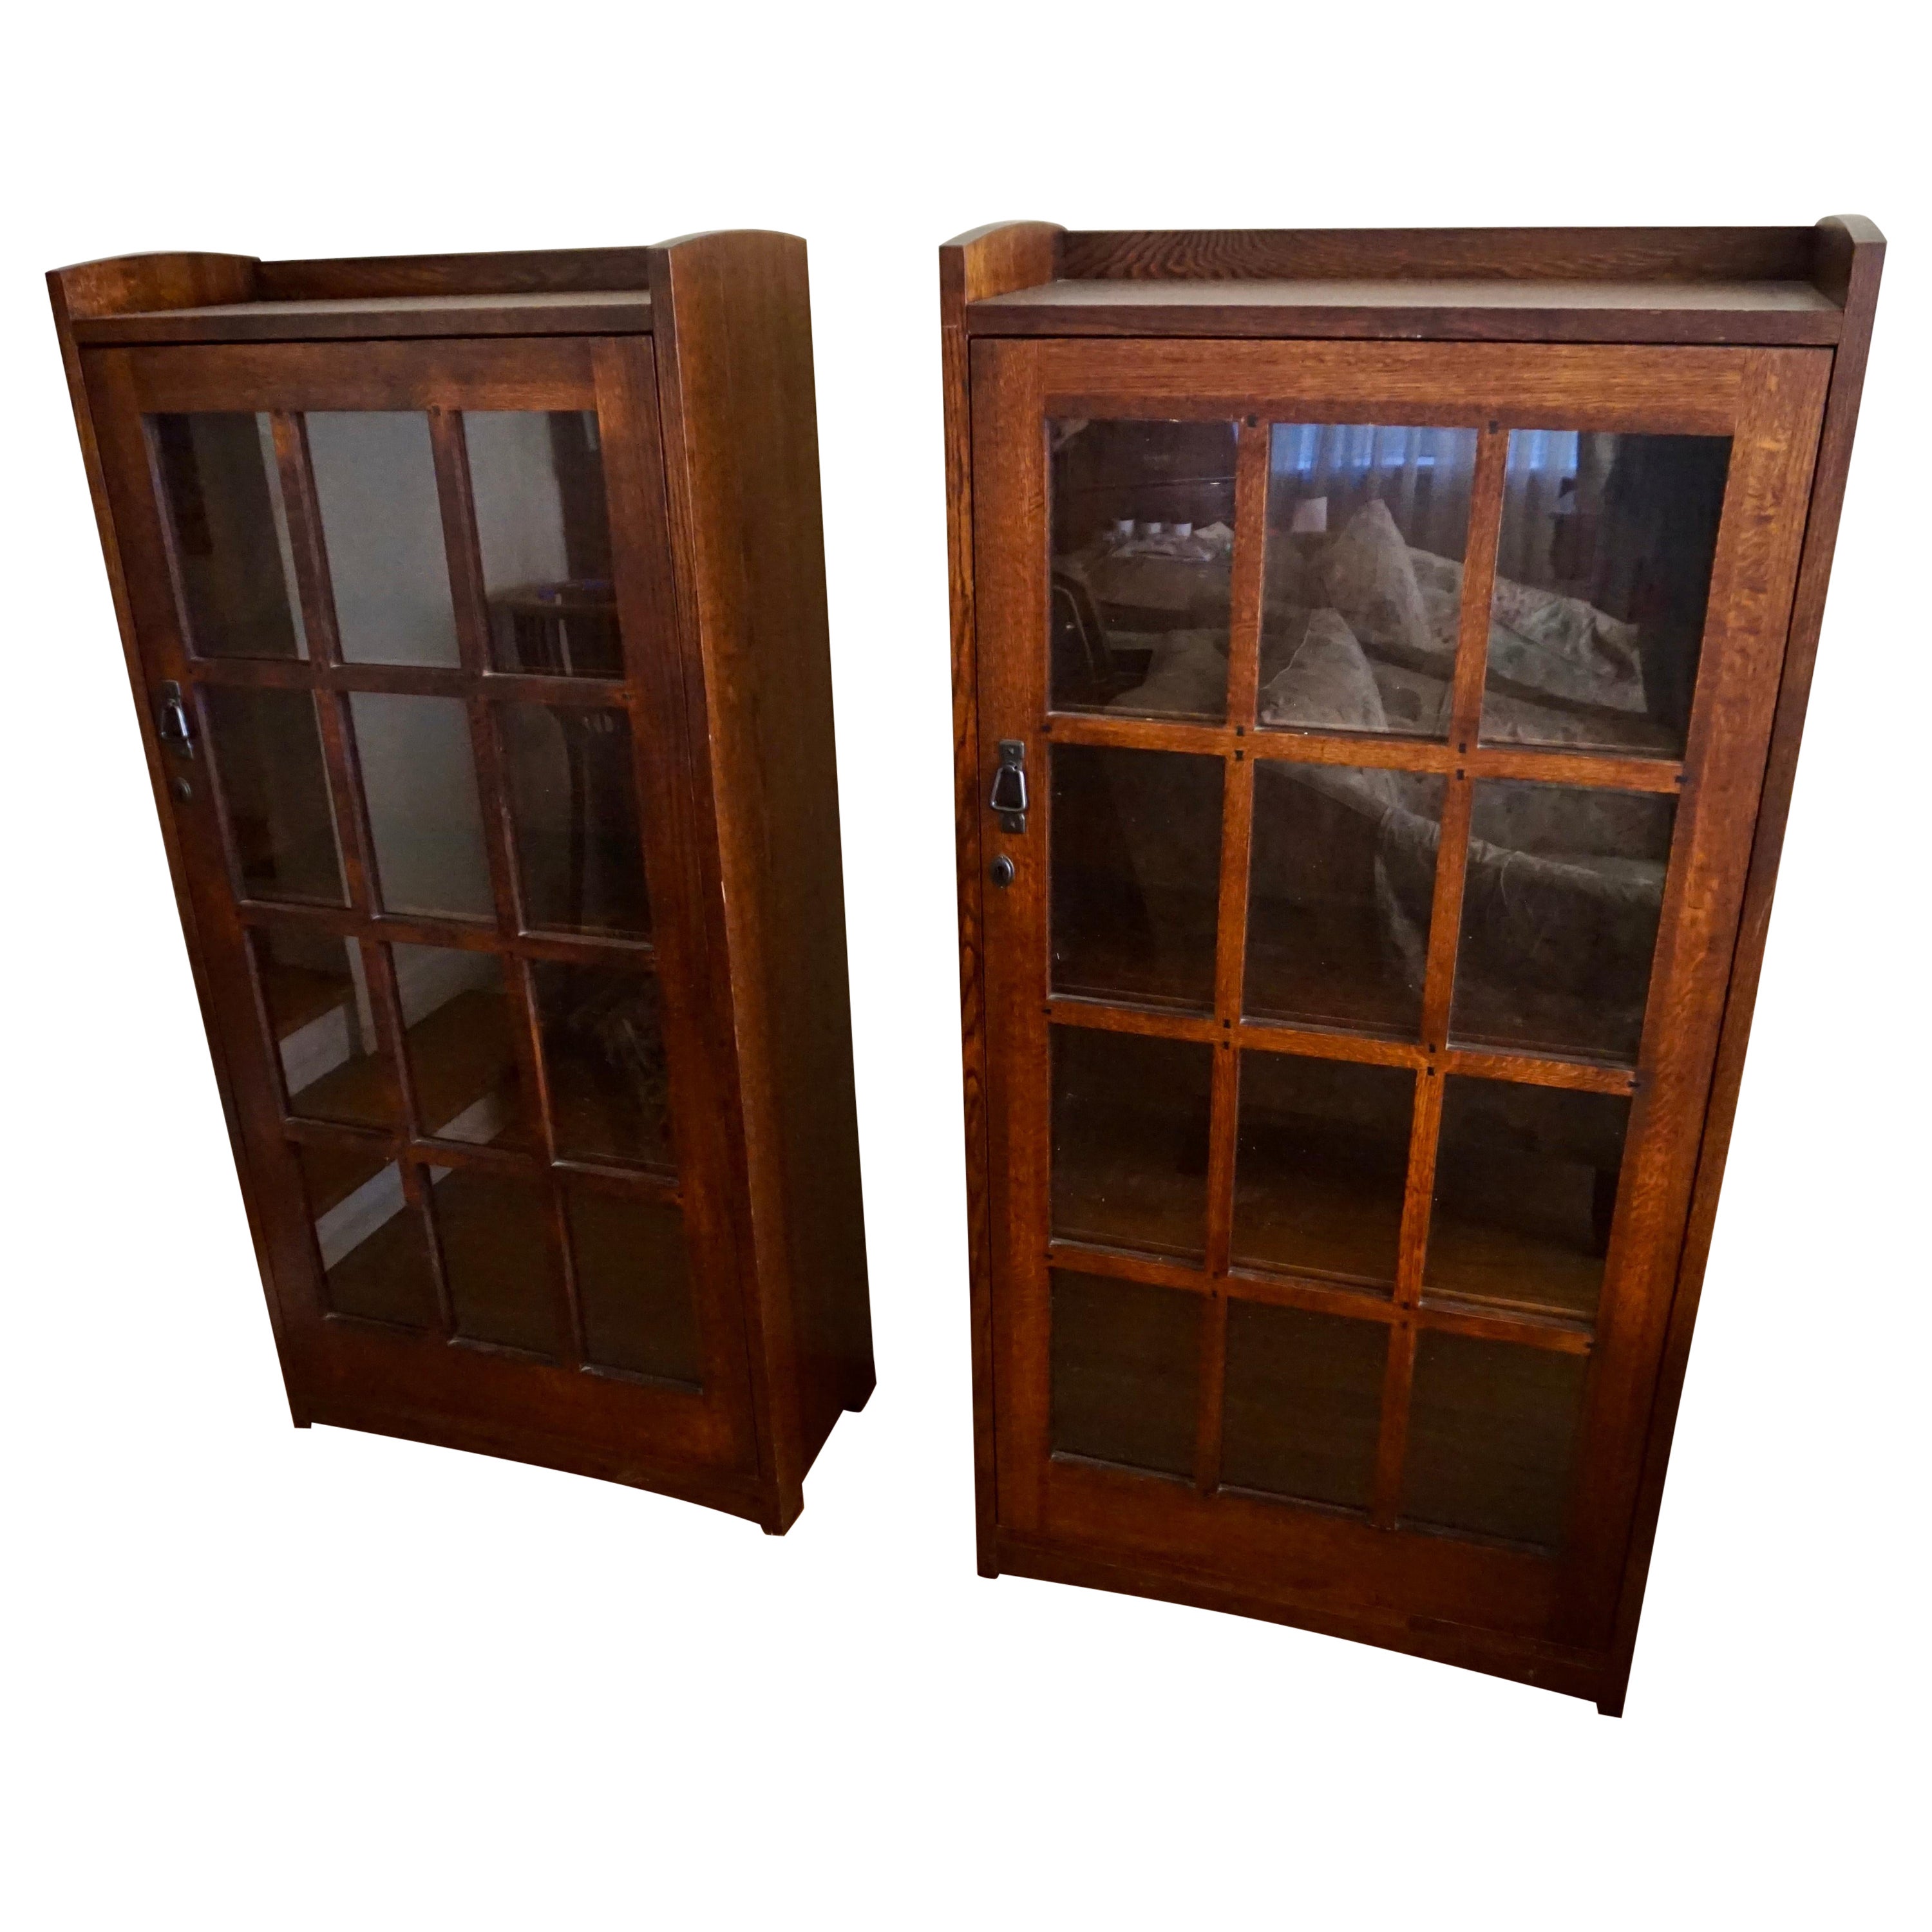 Pair Of Custom Handmade Arts & Crafts Style Solid Oak Bookcases Cum Cabinets For Sale